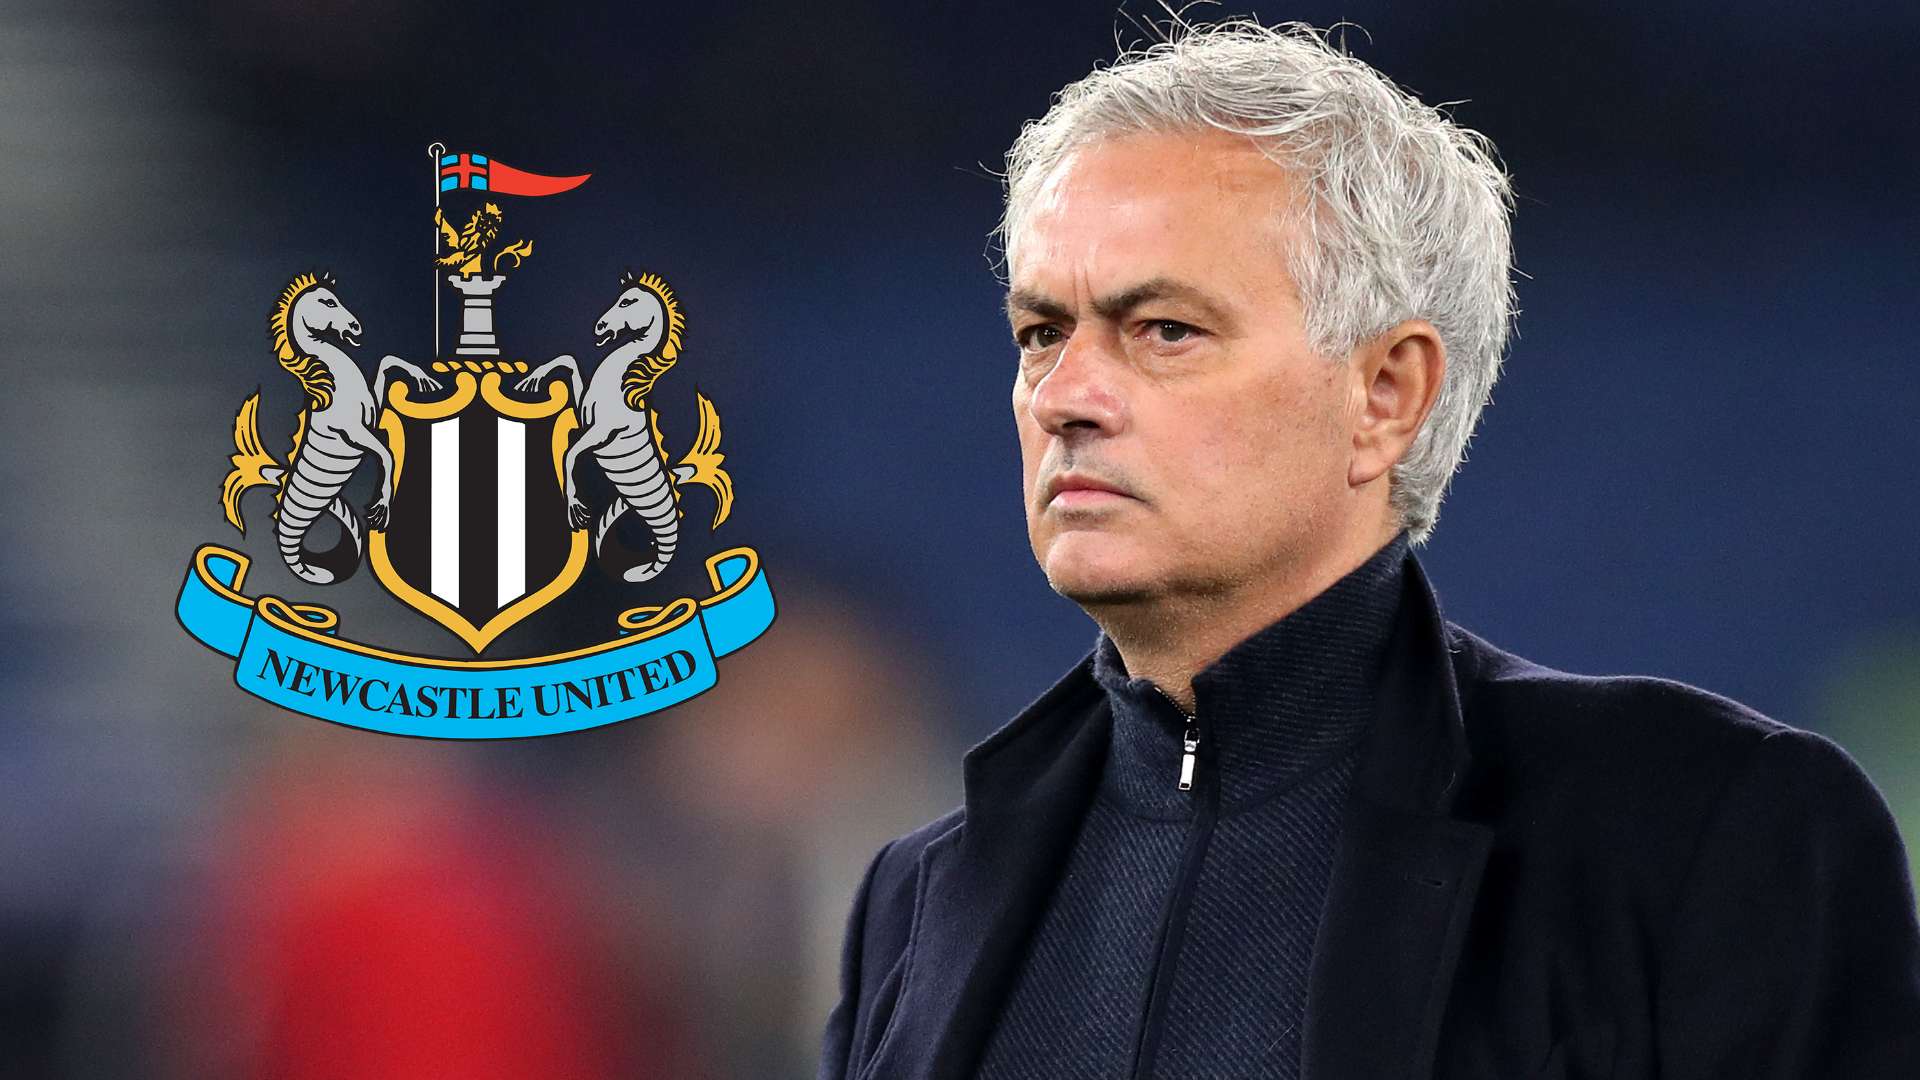 Newcastle has been rumored to be linked with Mourinho